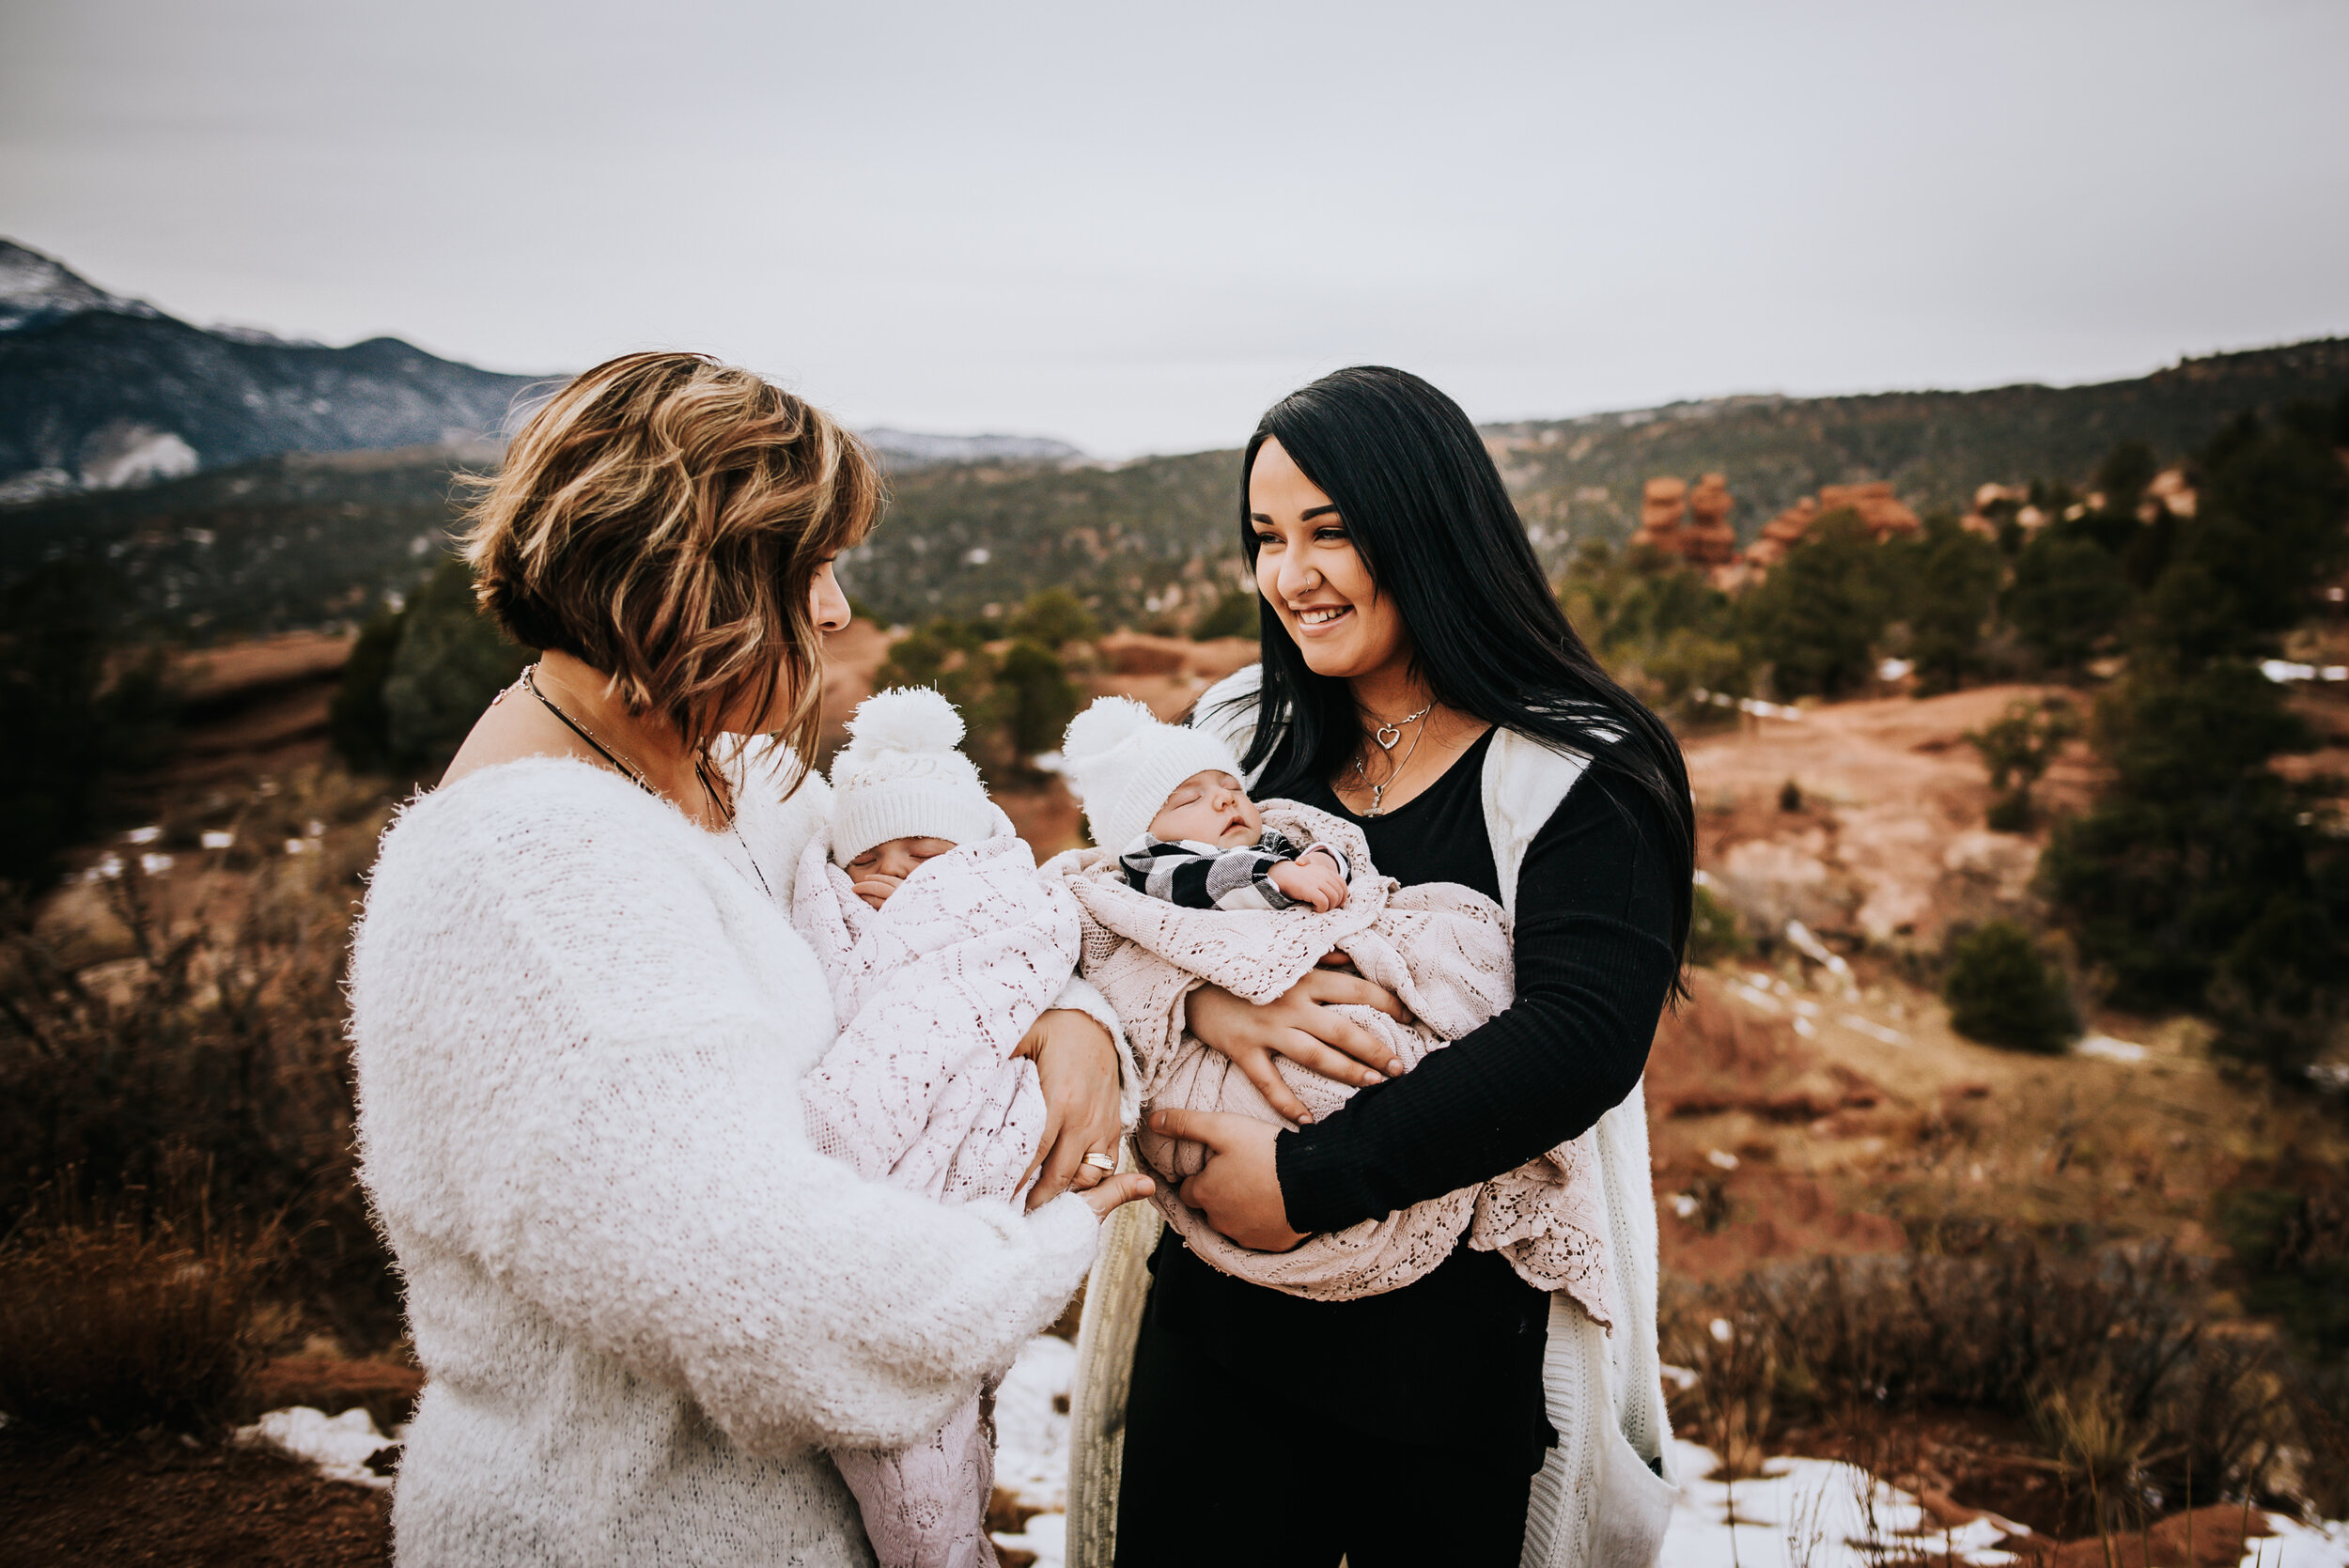 Lori Collins Extended Family Session Colorado Springs Sunset Garden of the Gods Wild Prairie Photography-23-2021.jpg